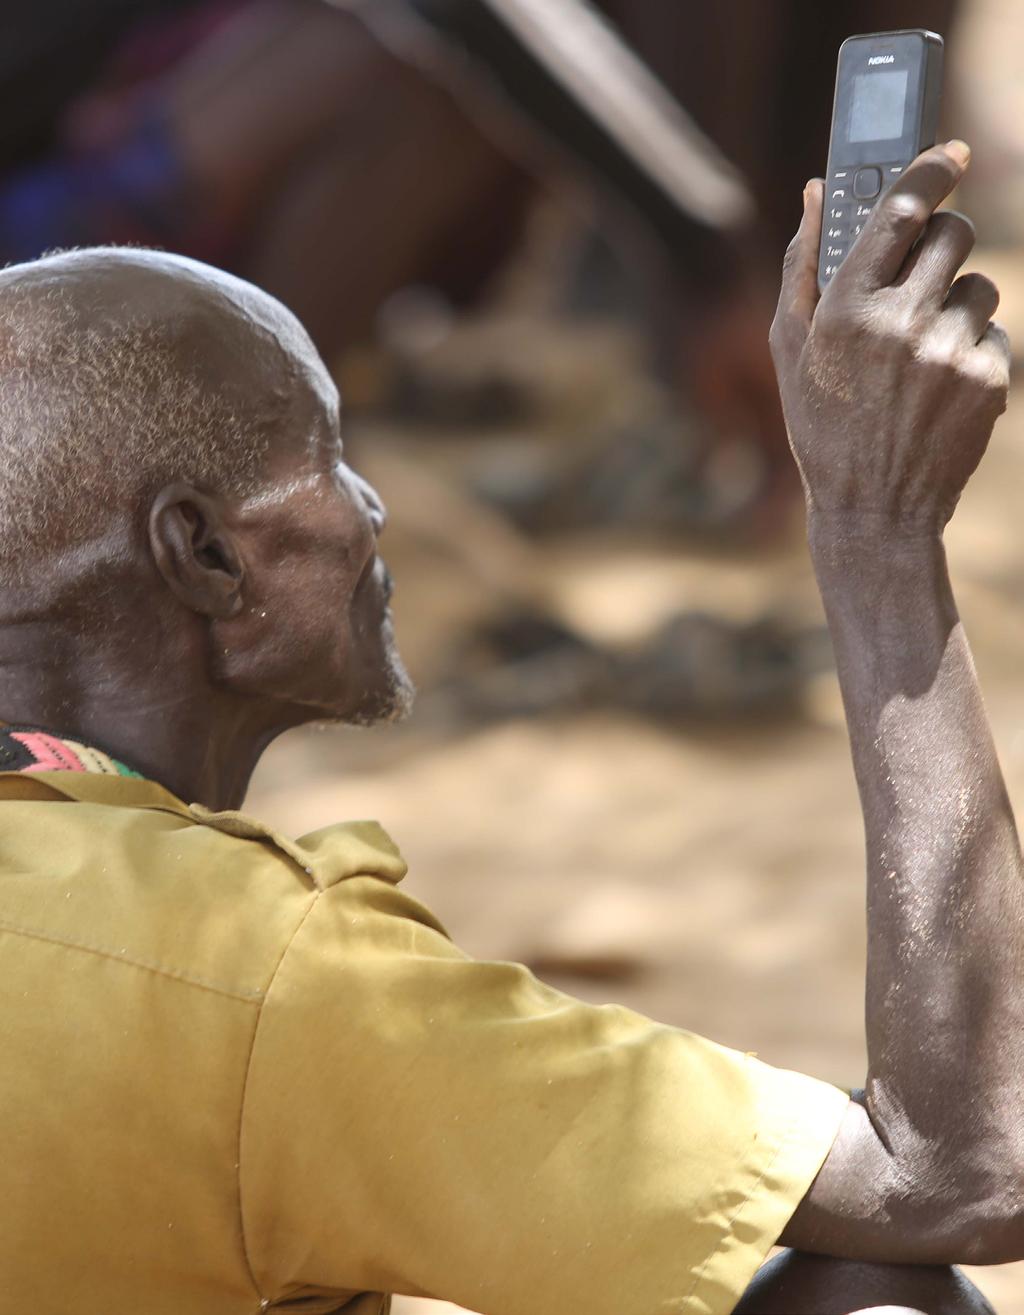 Our services reach over 2 million people every year A Turkana elder holds out his mobile phone during a public baraza discussing